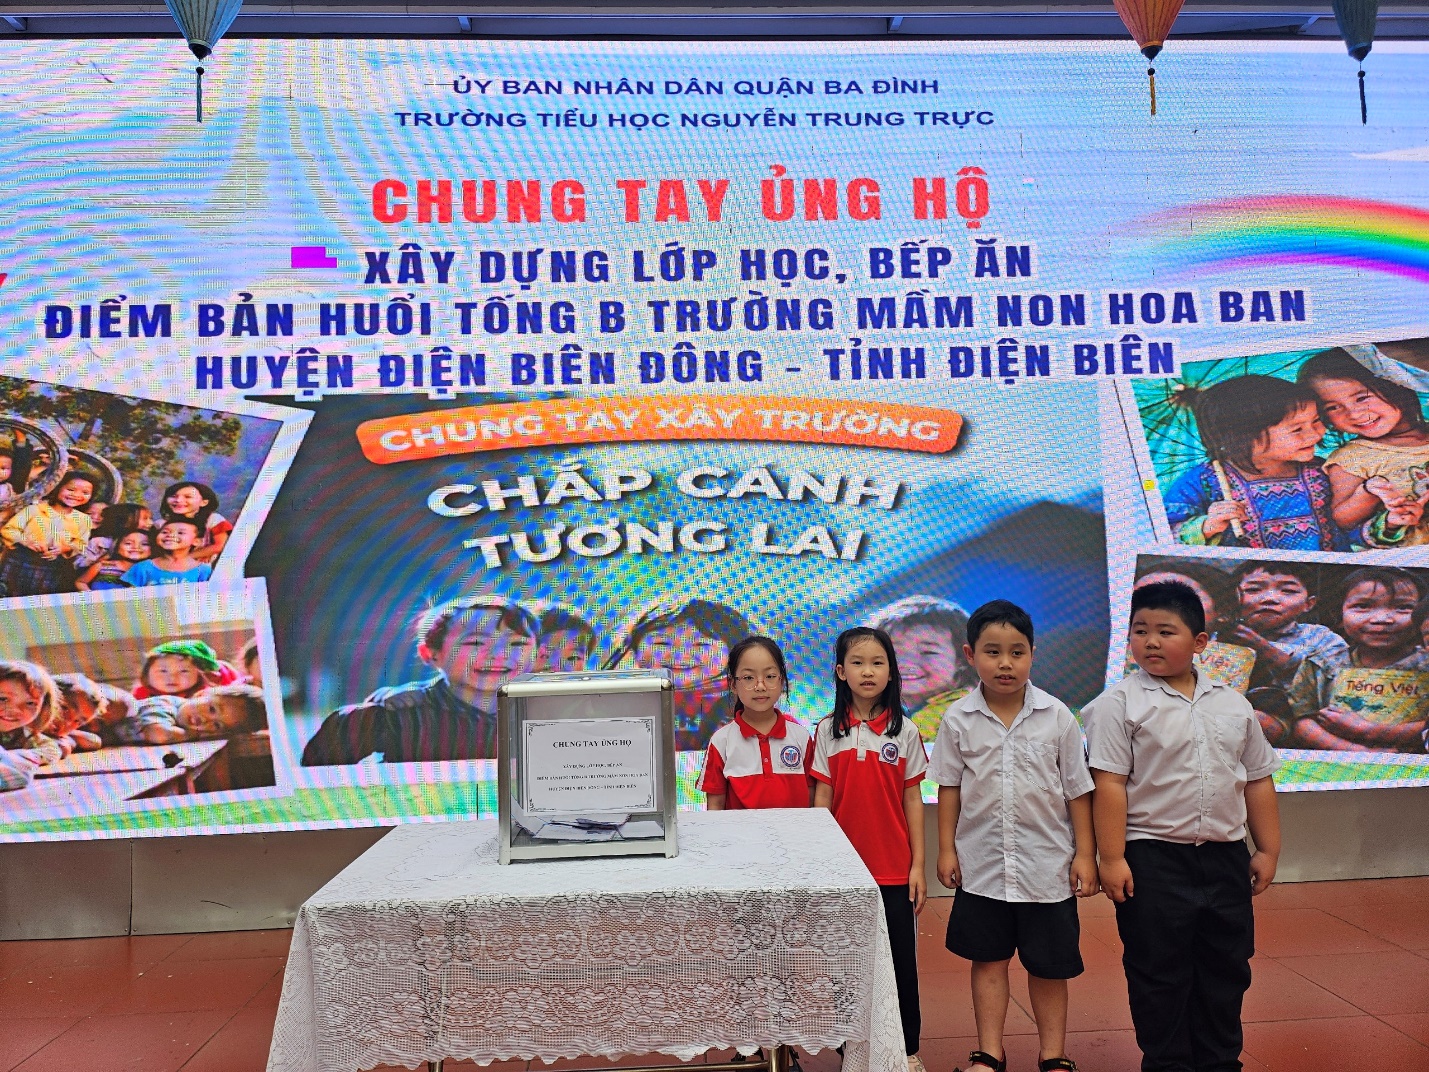 A group of children standing in front of a large sign

Description automatically generated